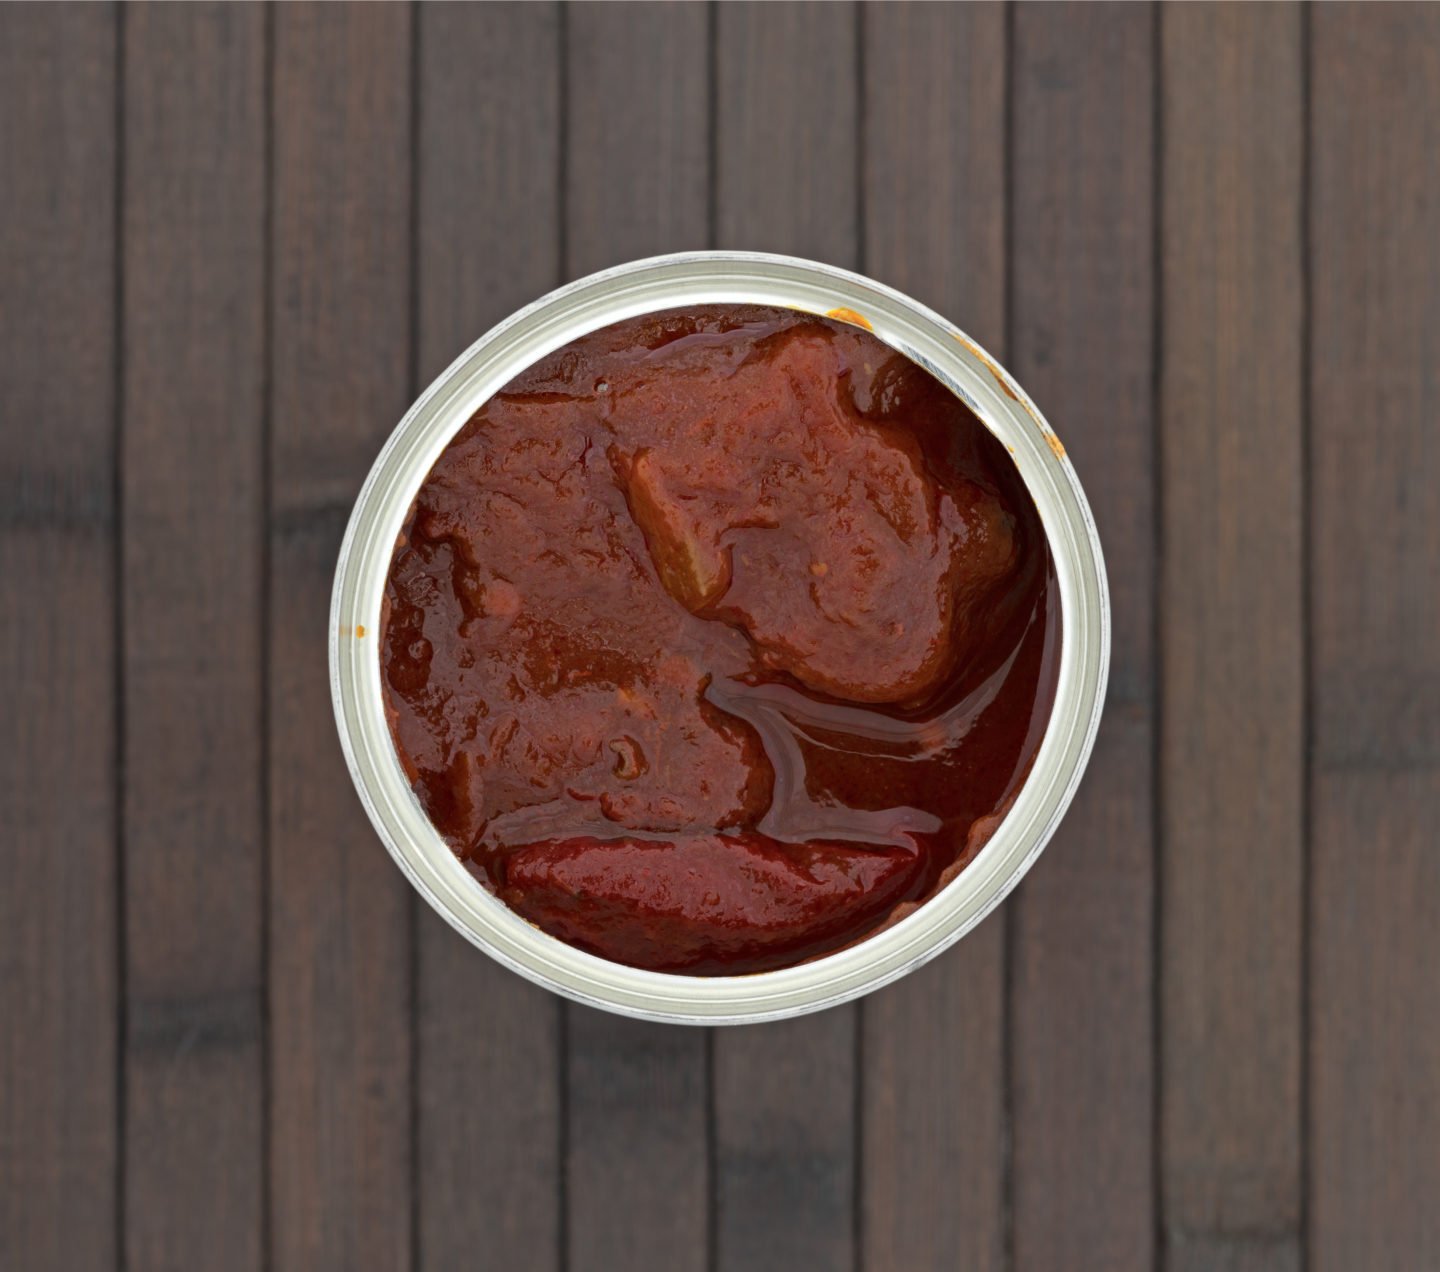 Canned Chipotle Peppers On Wooden Surface